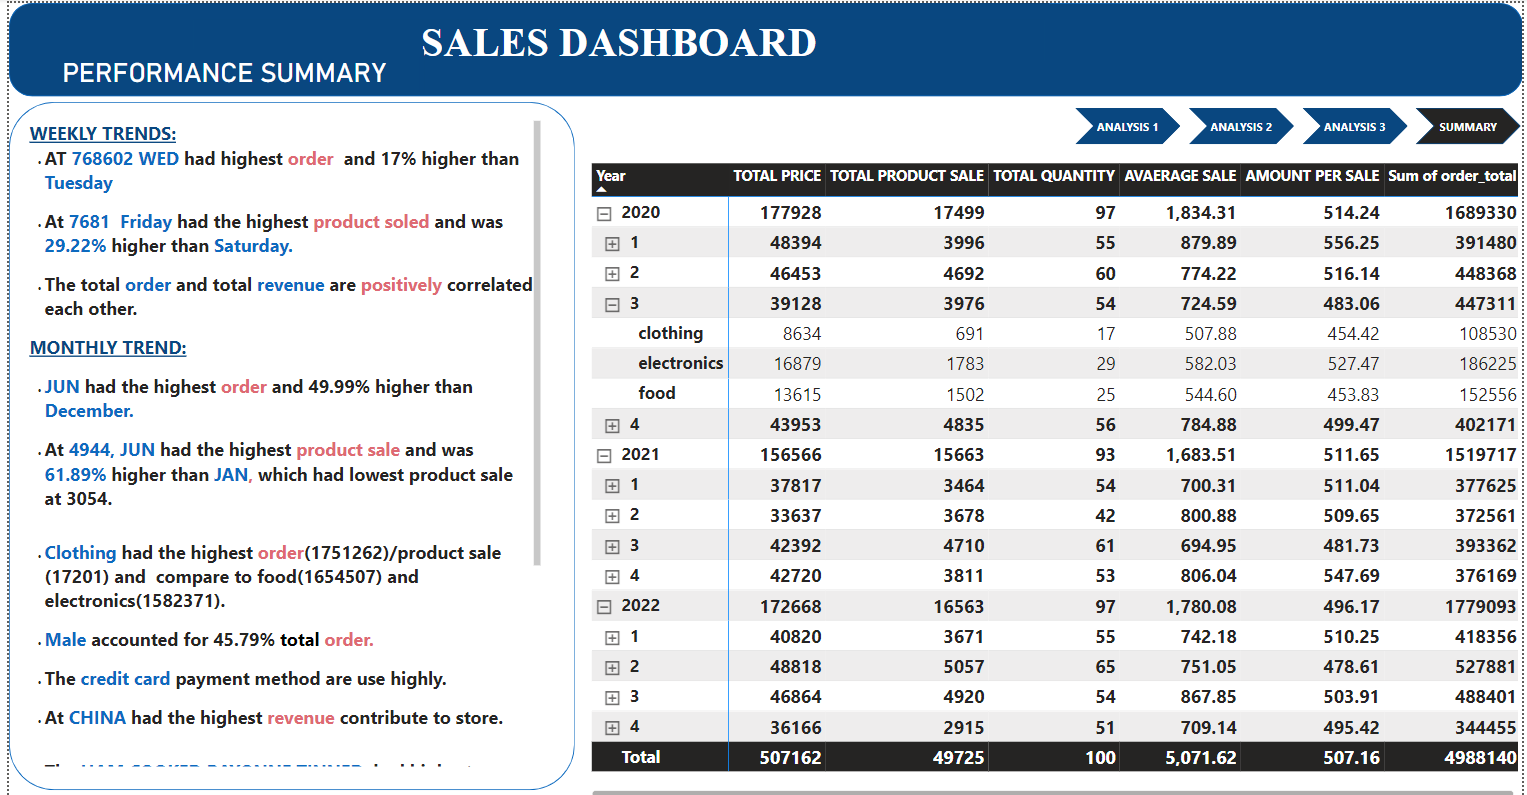 SALES DASHBOARD

PERFORMANCE SUMMARY

 

WEEKLY TRENDS;
AT 768602 WED had highest order and 17% higher than
Tuesday

At 7681 Friday had the highest product soled and was
29.22% higher than Saturday.

The total order and total revenue are positively correlated
each other.

MONTHLY TREND:

JUN had the highest order and 49.99% higher than
December.

At 4944, JUN had the highest product sale and was
61.89% higher than JAN, which had lowest product sale
213054.

Clothing had the highest order(1751262)/product sale
(17201) and compare to food(1654507) and
electronics(1582371).

Male accounted for 45.79% total order.
The credit card payment method are use highly.

At CHINA had the highest revenue contribute to store.

= 2020 177928
@1 48394
22 46453
a3 39128

clothing 8634
electronics 16879
food 1161

@4 43953

= 2021 156566
@1 37817
22 33637
®3 42392
4 42720

= 2022 172668
oR] 40820
®2 48818
23 46864

4 36166

io BE 2AL>]

17499
3996
4692

3976

OTAL PRICE TOTAL PRODUCT SALE TOTAL QUANTITY AVAERAGE SALE AMOUNT PER SALE Sum of order total

97 1.834.31
55 879.89
60 774.22
54 724.59
0) 482.03
) 244 60
56 784.88
93 1,683.51
54 700.31
42 800.88
61 694.95
53 806.04
97 1,780.08
55 742.18
65 751.05
54 867.85
51 709.14

pL 5,071.62

514.24
556.25

516.14
483.06

 

499.47
511.65
511.04
509.65
481.73
547.69
496.17
510.25
478.61
503.91

 

1689330
391480
448368
447311

186204
402171

1519717
377625
372561
393362
376169

1779093
418356
527881
488401
344455

REE